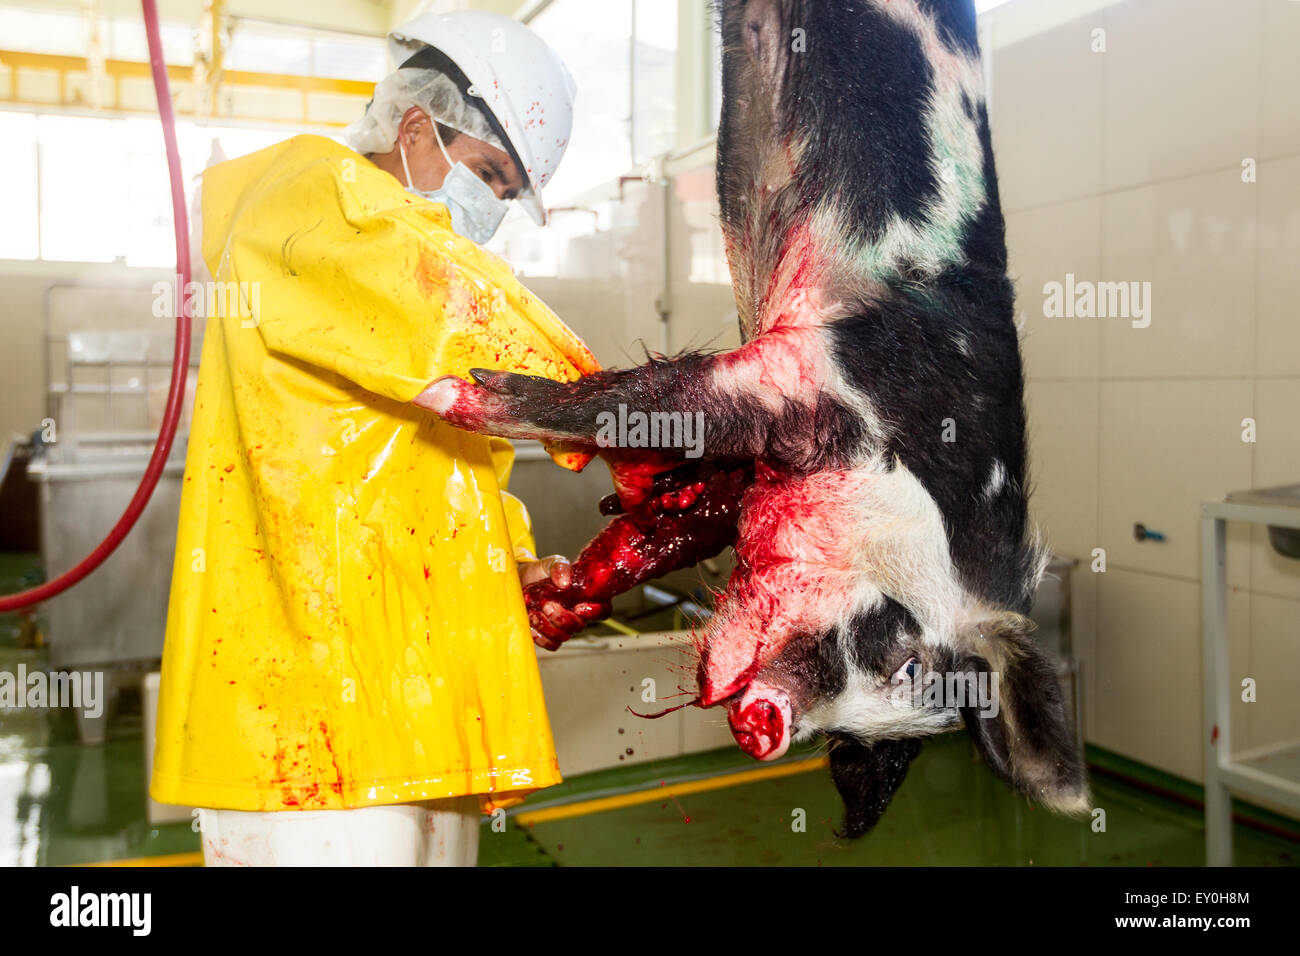 Slaughterhouse Butcher Killing A Pig That Look Straight Into The Camera Focus On Animal Head Stock Photo